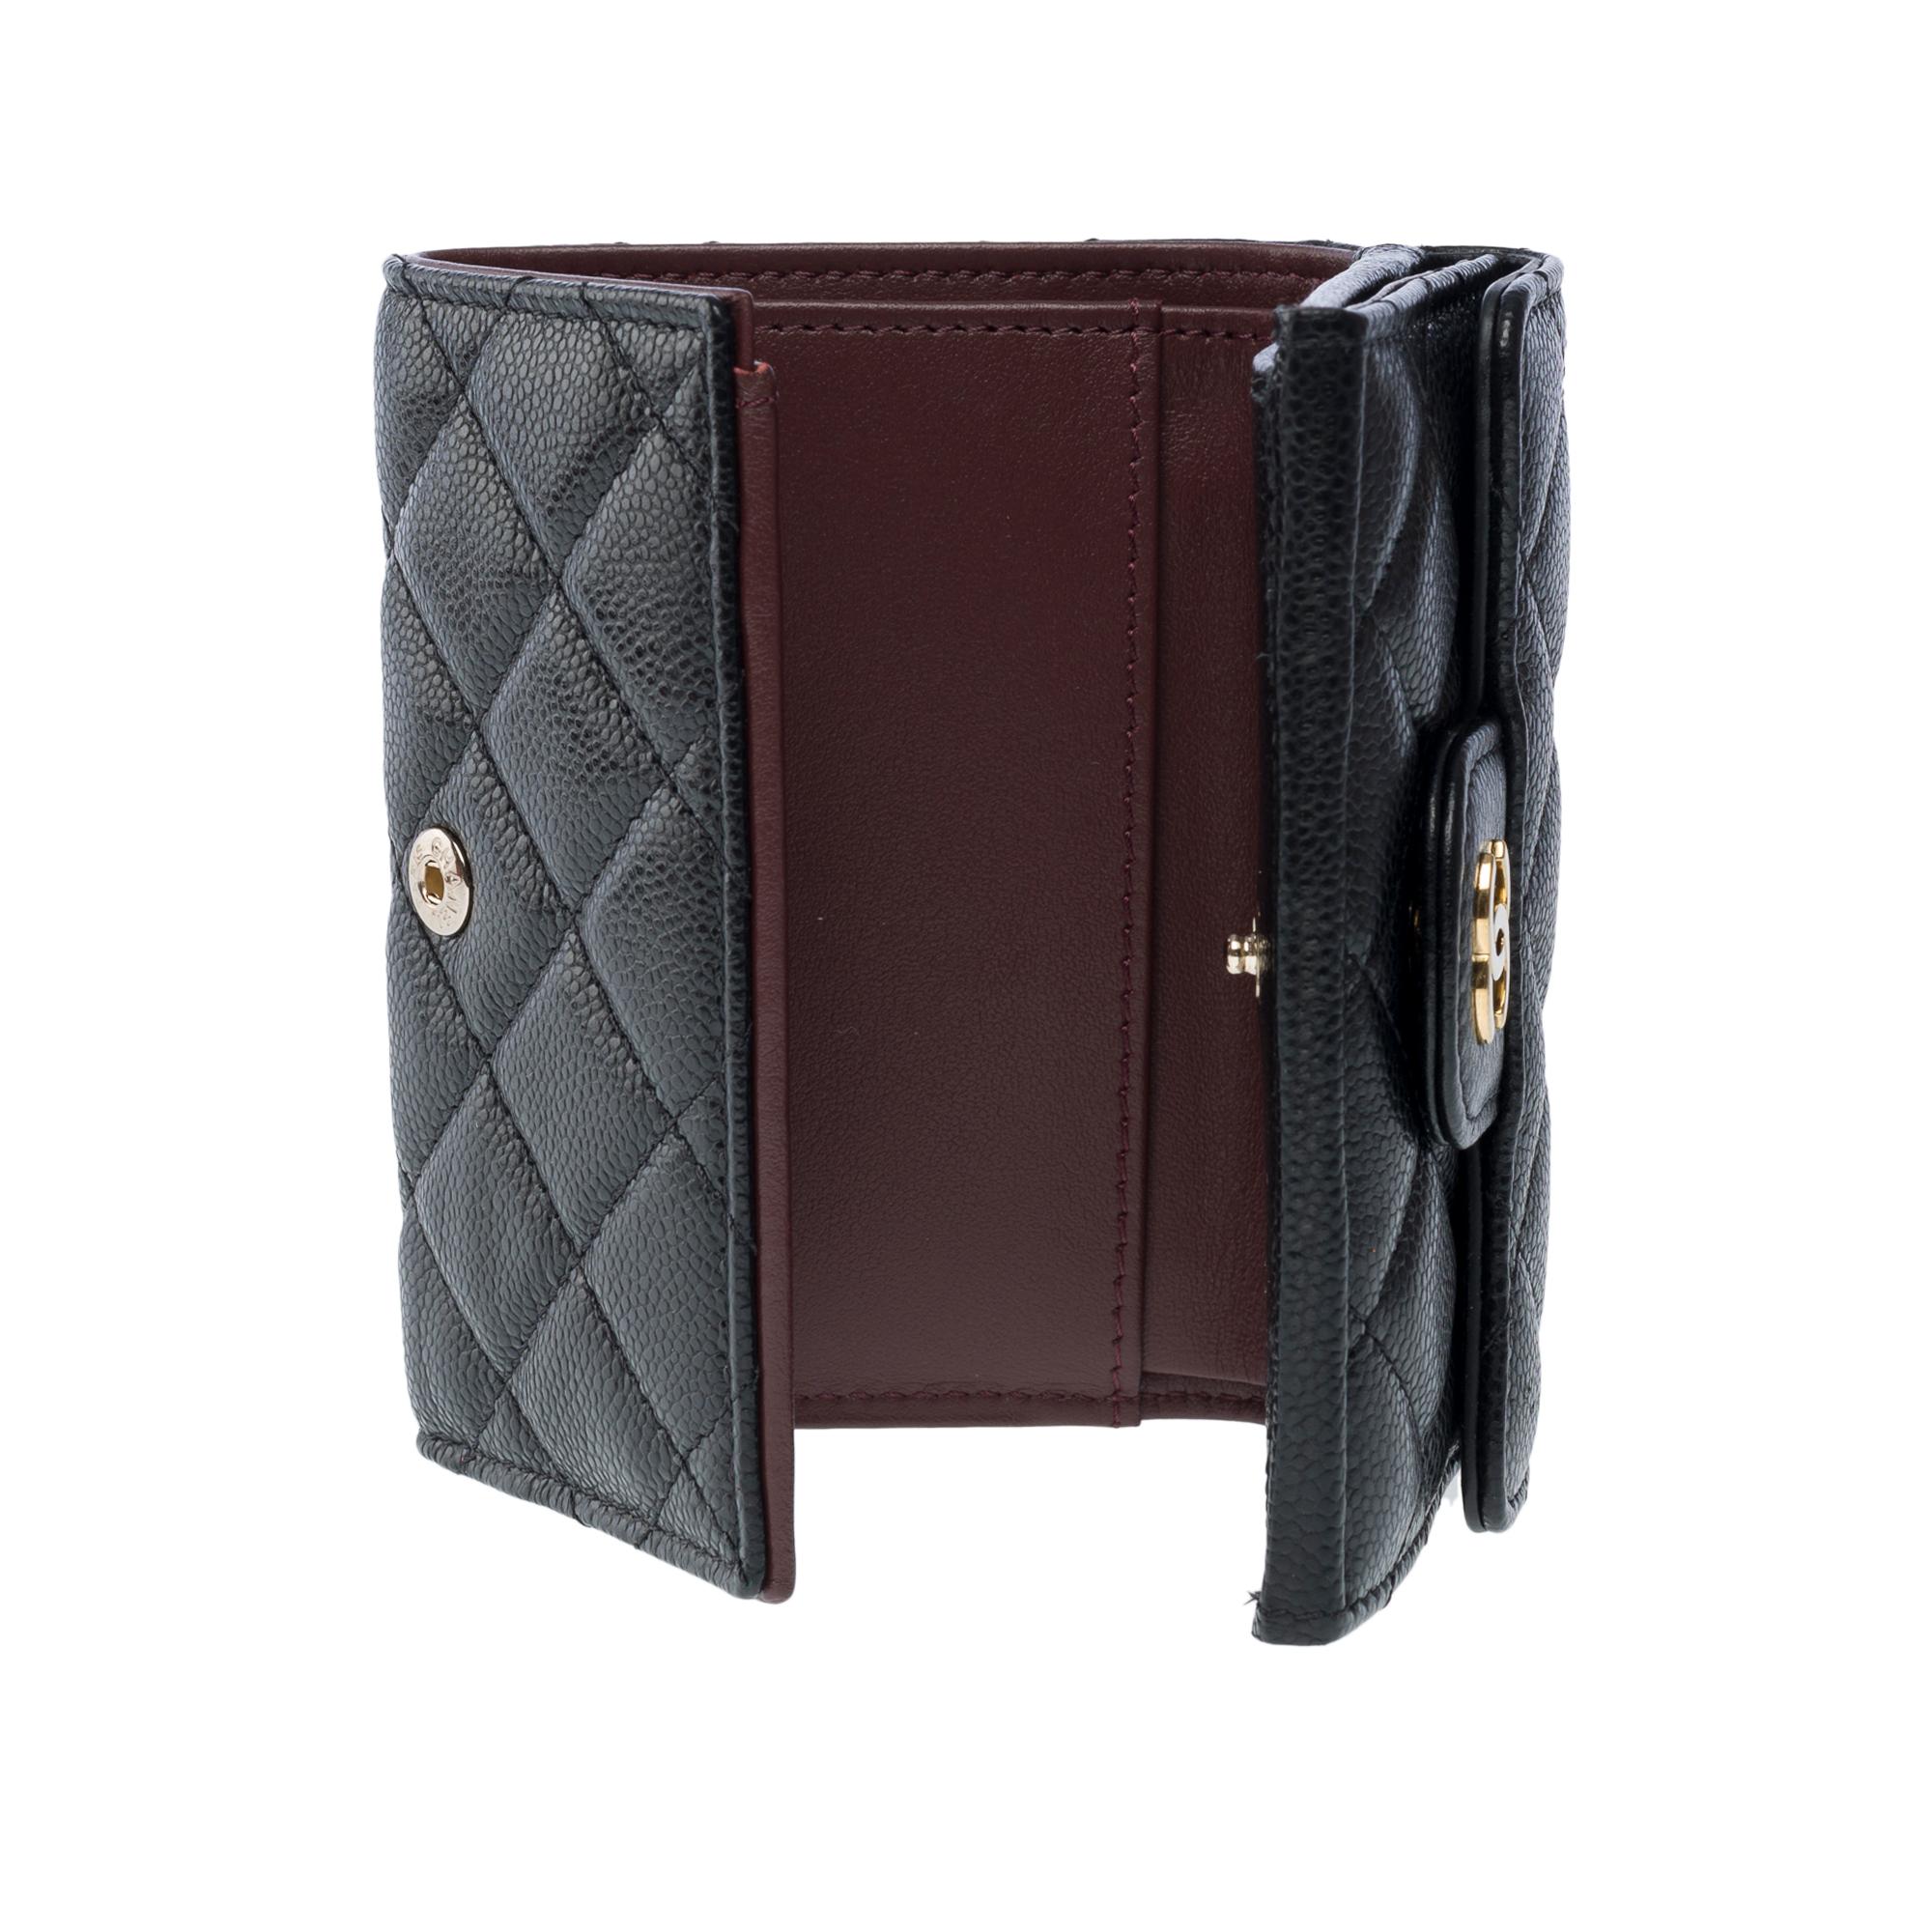 Gorgeous Chanel Wallet  in black Caviar quilted leather, GHW 5